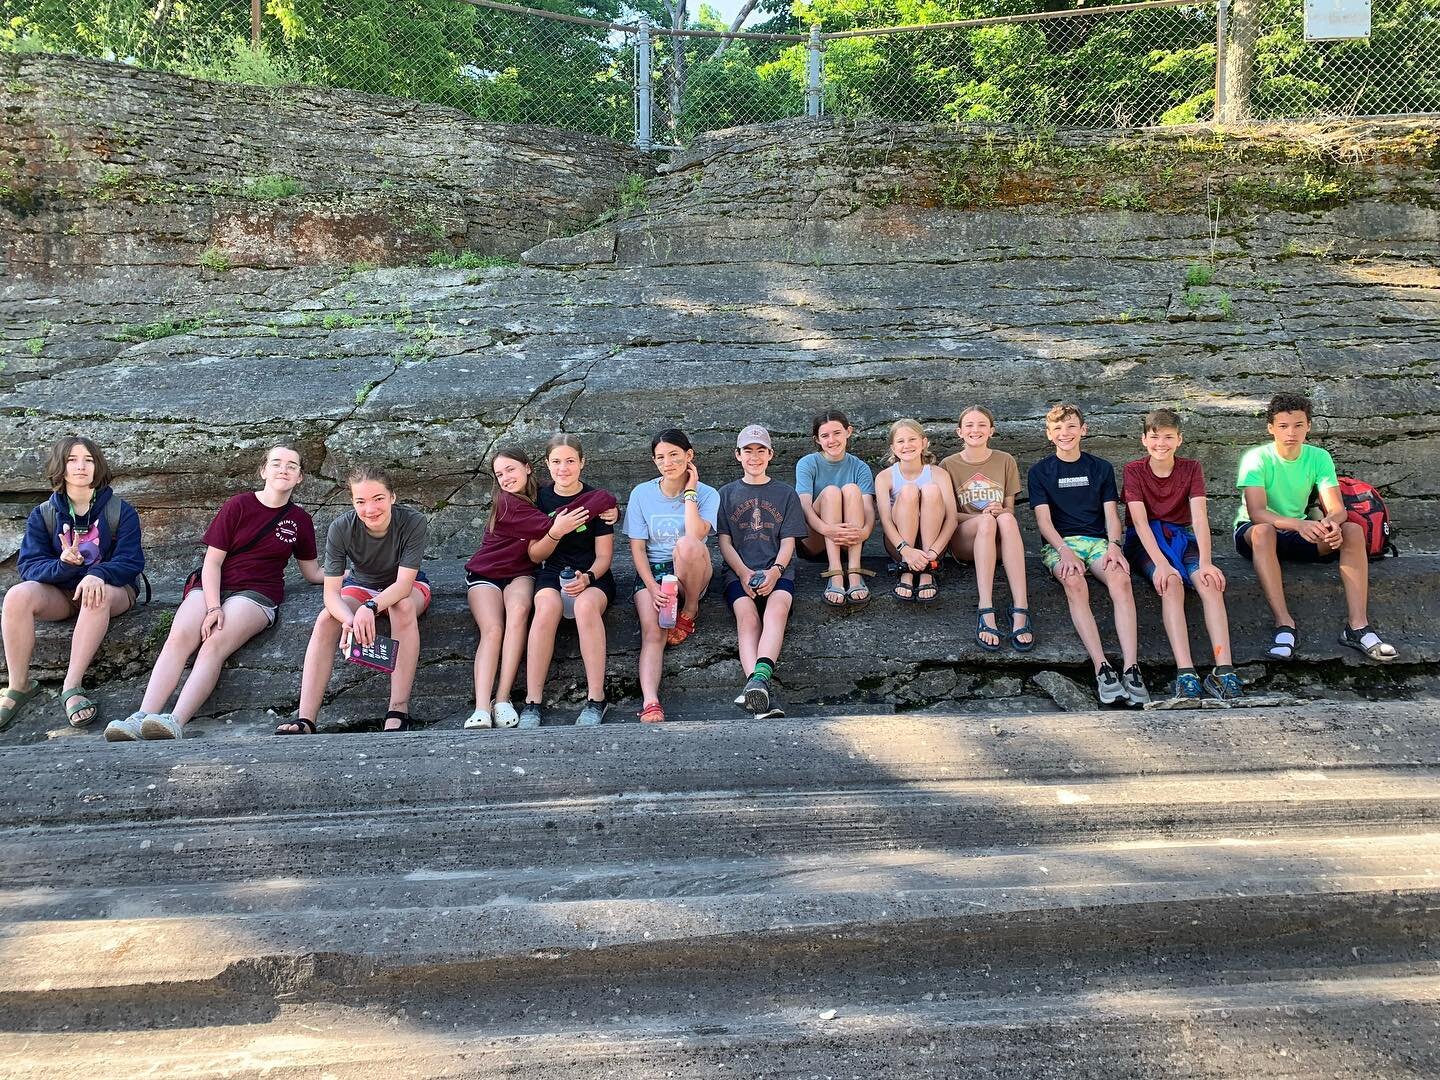 Fossil hunters galore!! We have loved learned and hunting for fossils all over Ohio. We have spent evenings in the rain, cooking dinner and setting up camp. We also got the AWESOME opportunity to not only see, but walk along the glacial grooves on Ke